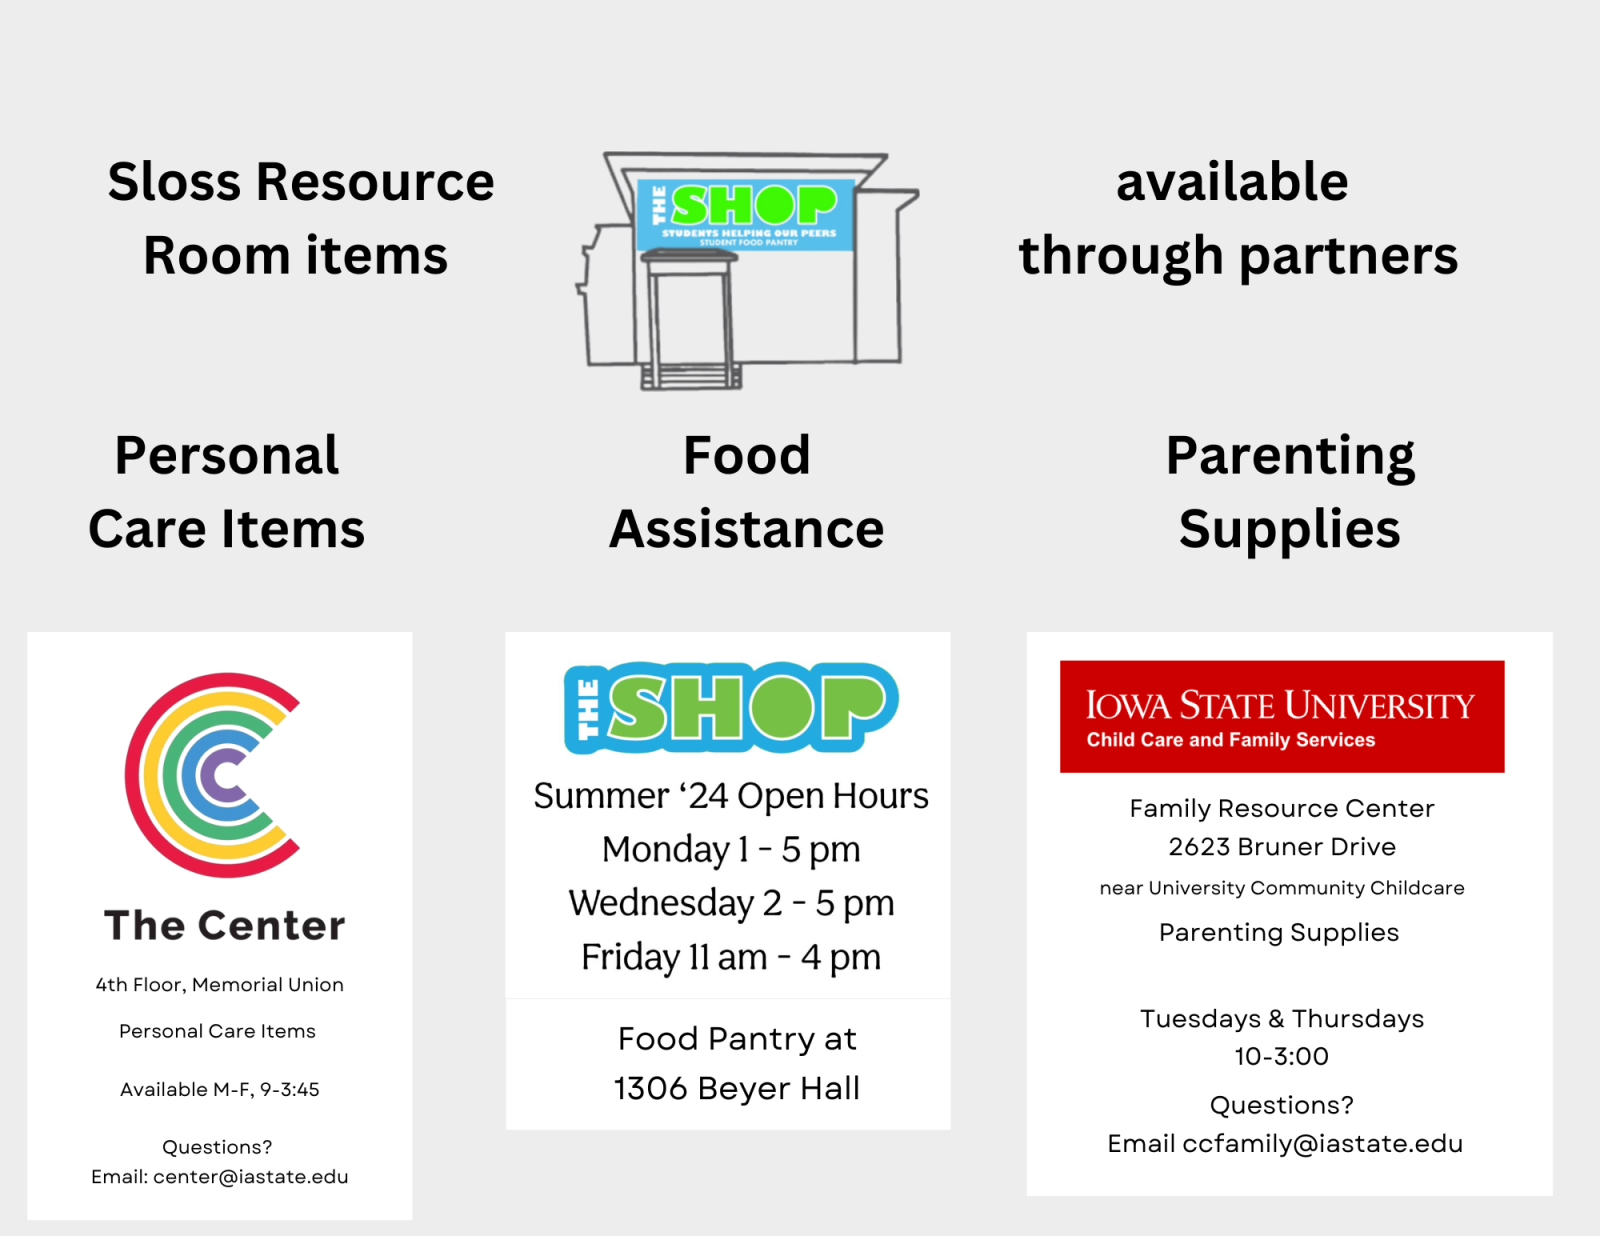 Sloss RR is closed for renovations.  Personal Care items are available at the Center. Food assistance is available through the SHOP.  Parenting supplies are available at the Office of Childcare and Family Services. 